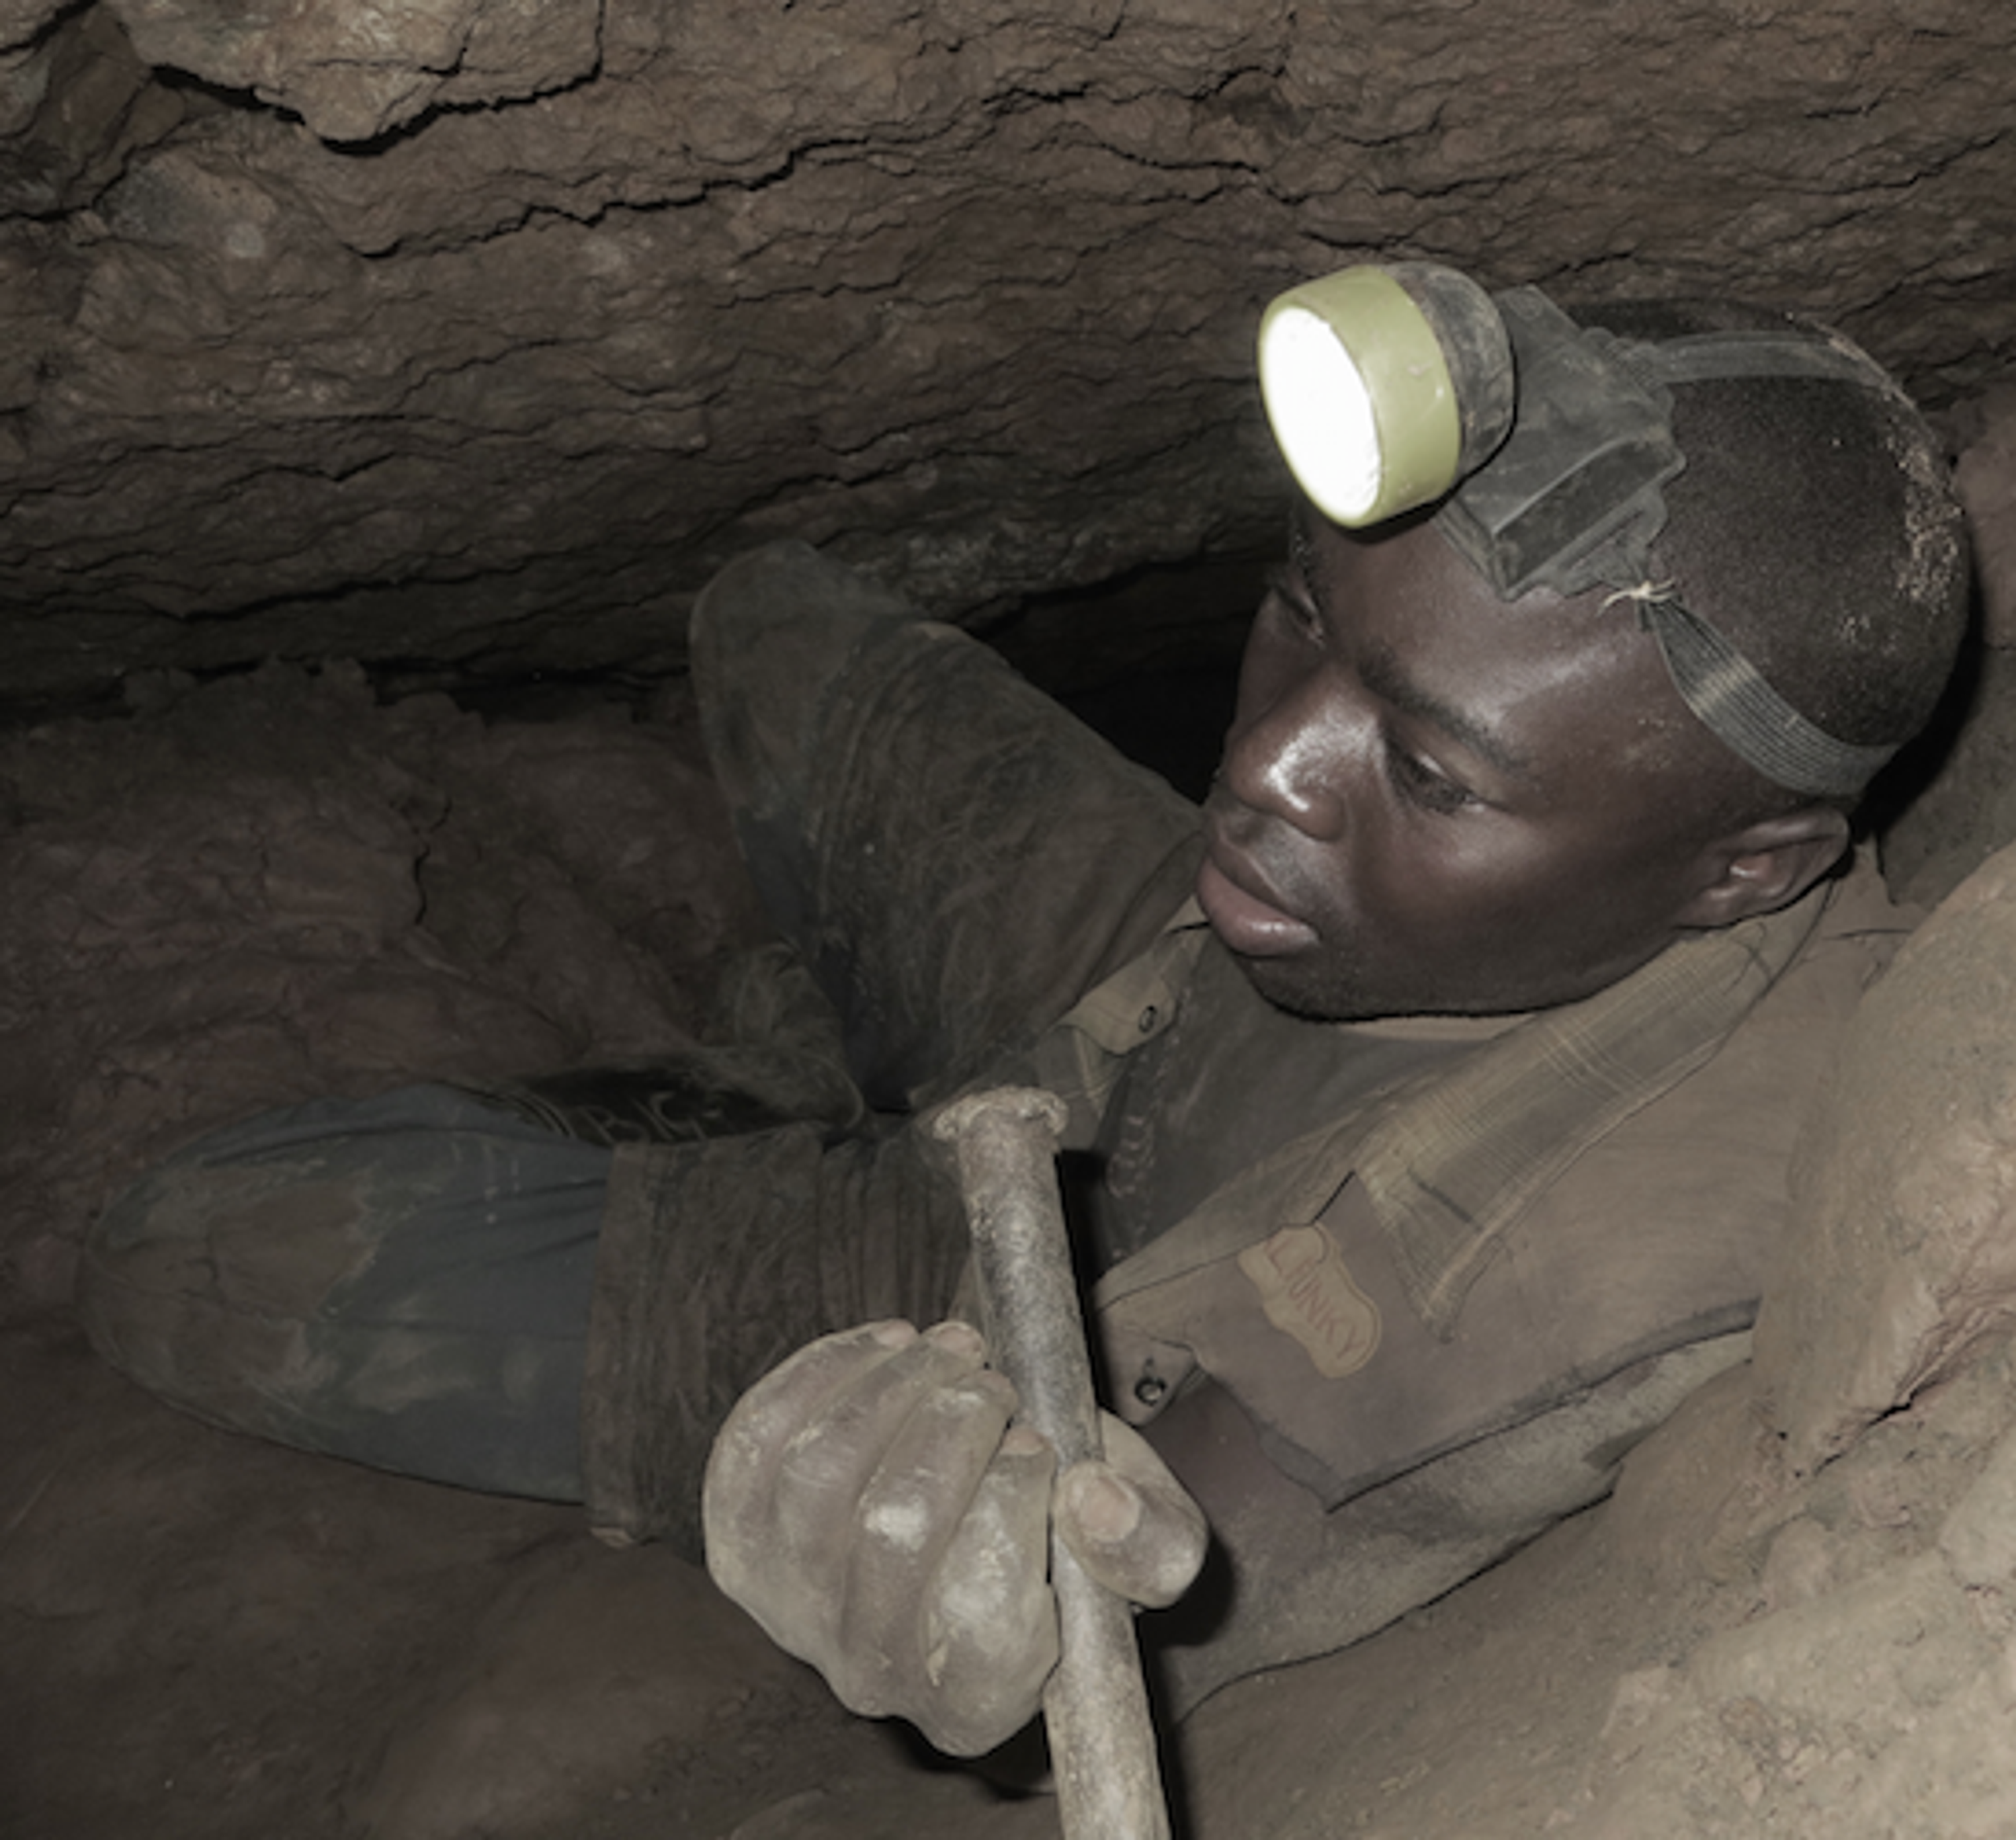 Working conditions are tough, but artisanal mining provides an essential livelihood to millions in the Congo